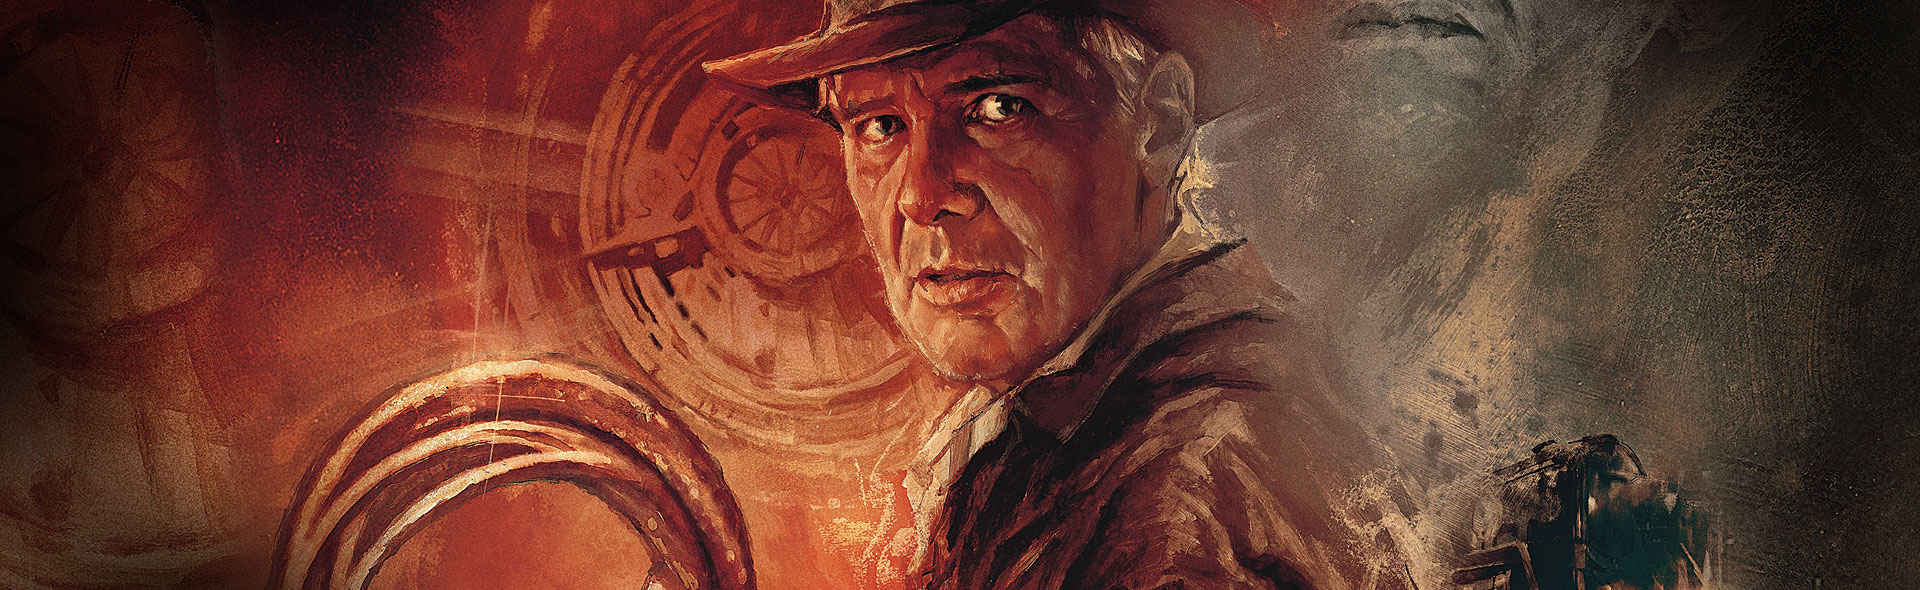 Indiana Jones and the Dial of Destiny_slide_poster